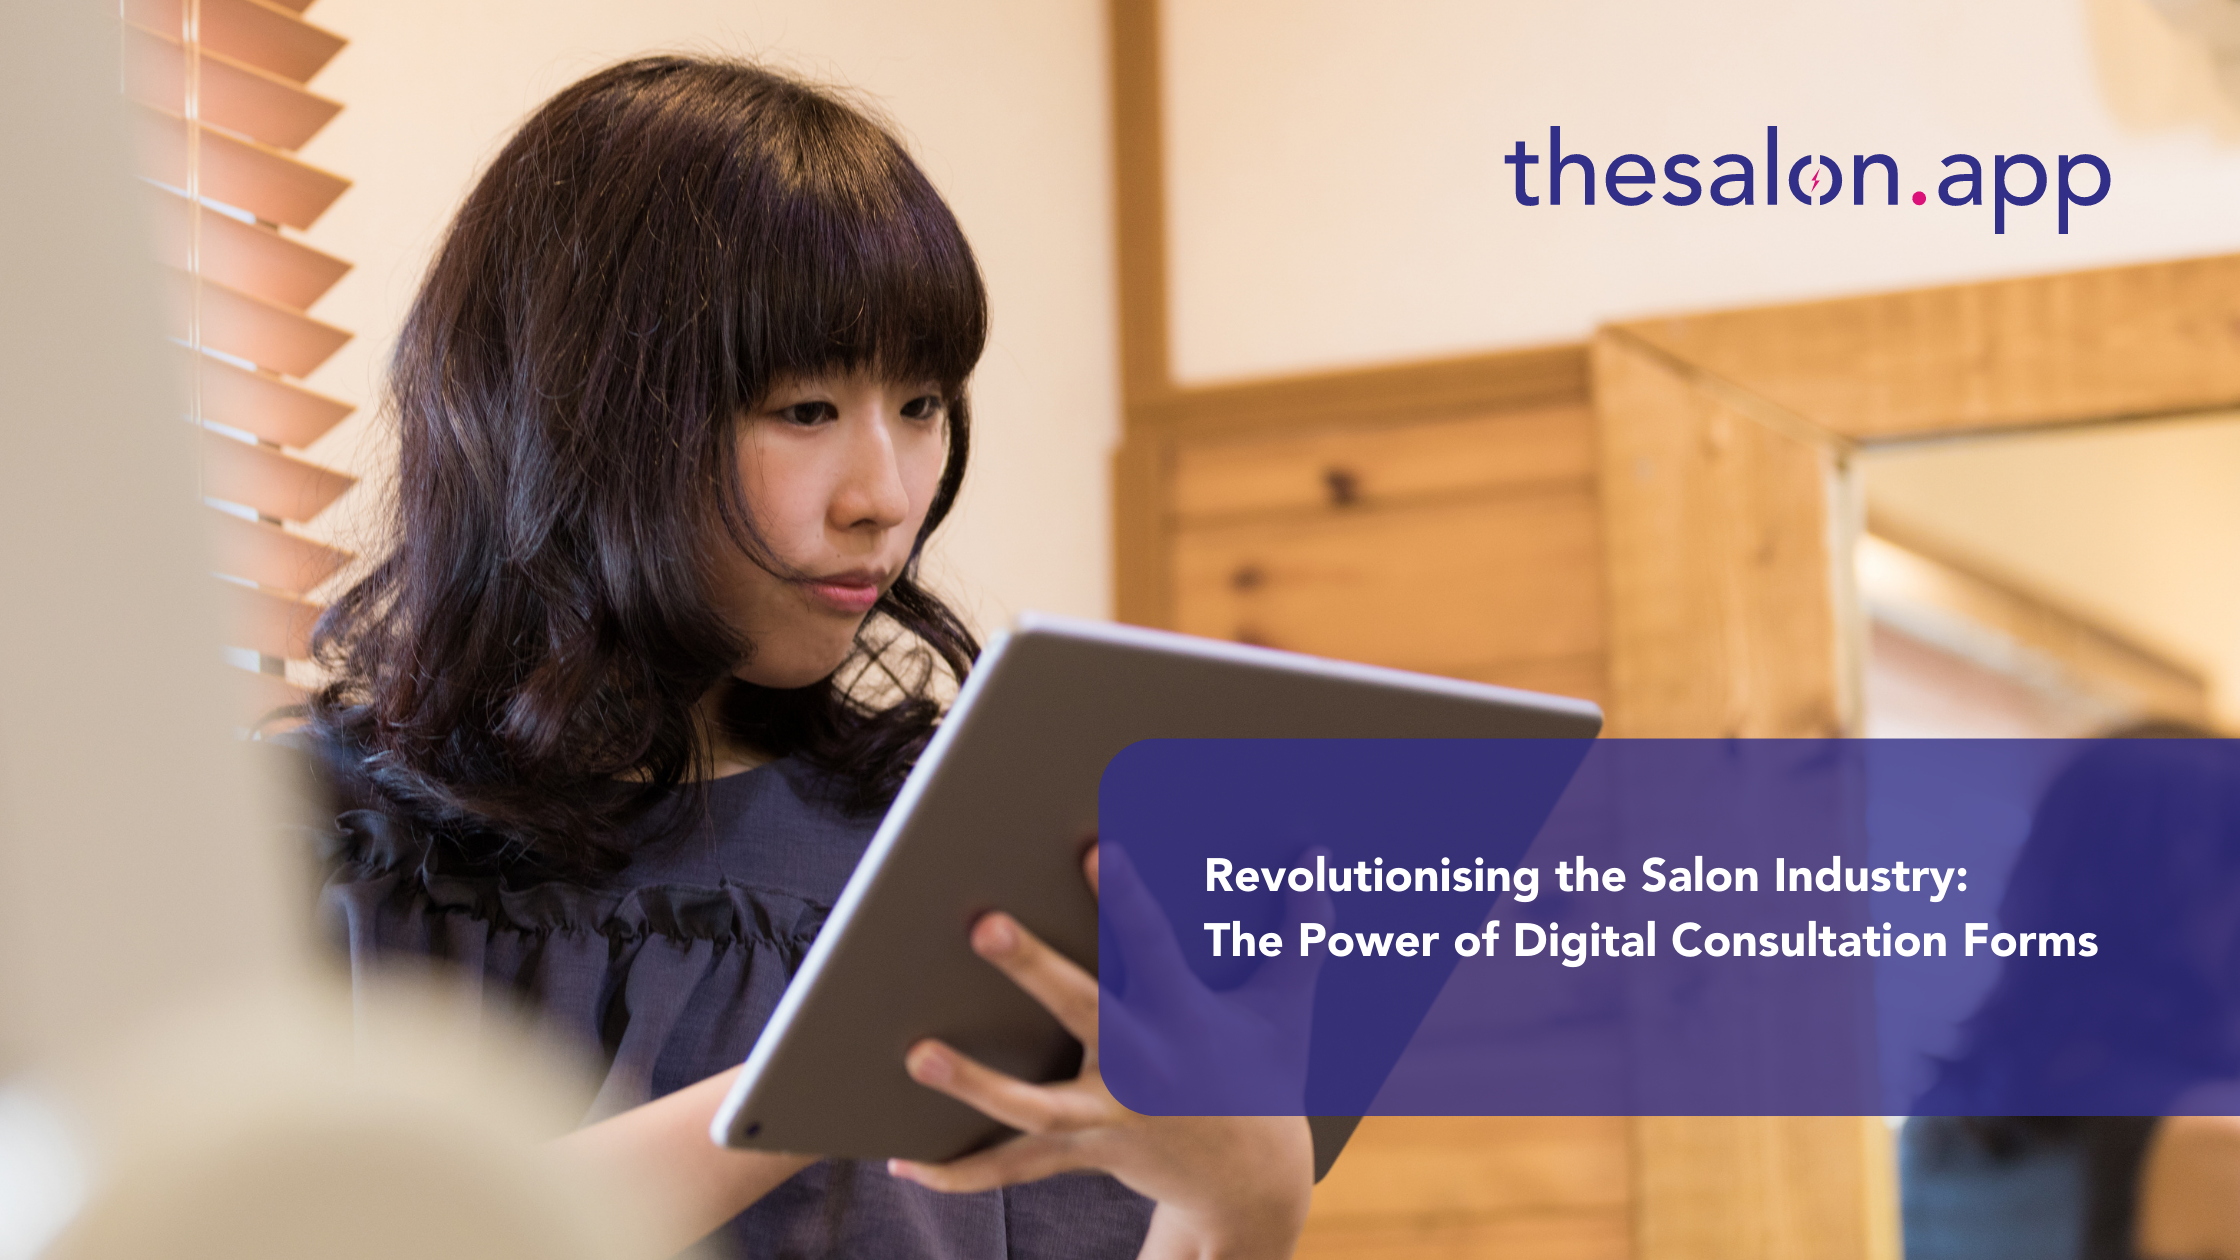 Revolutionising the salon industry: The power of Digital Consultation Forms